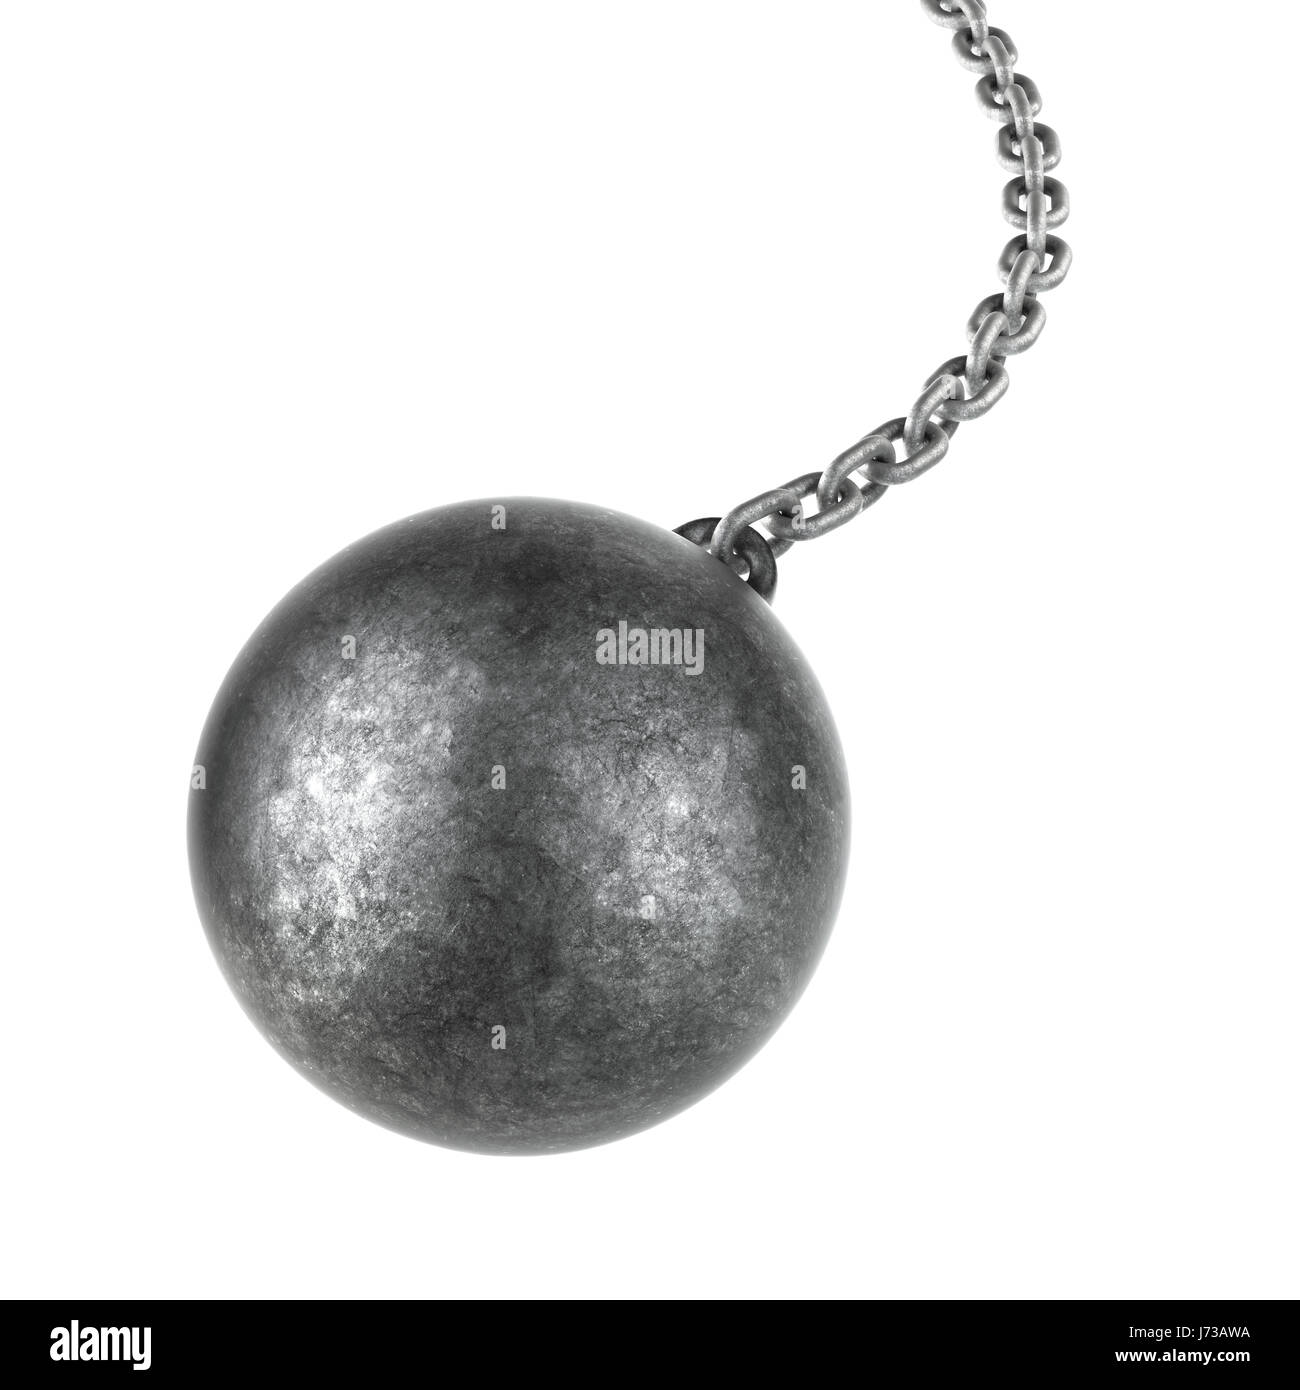 Wrecking ball isolated on a white background. Stock Photo